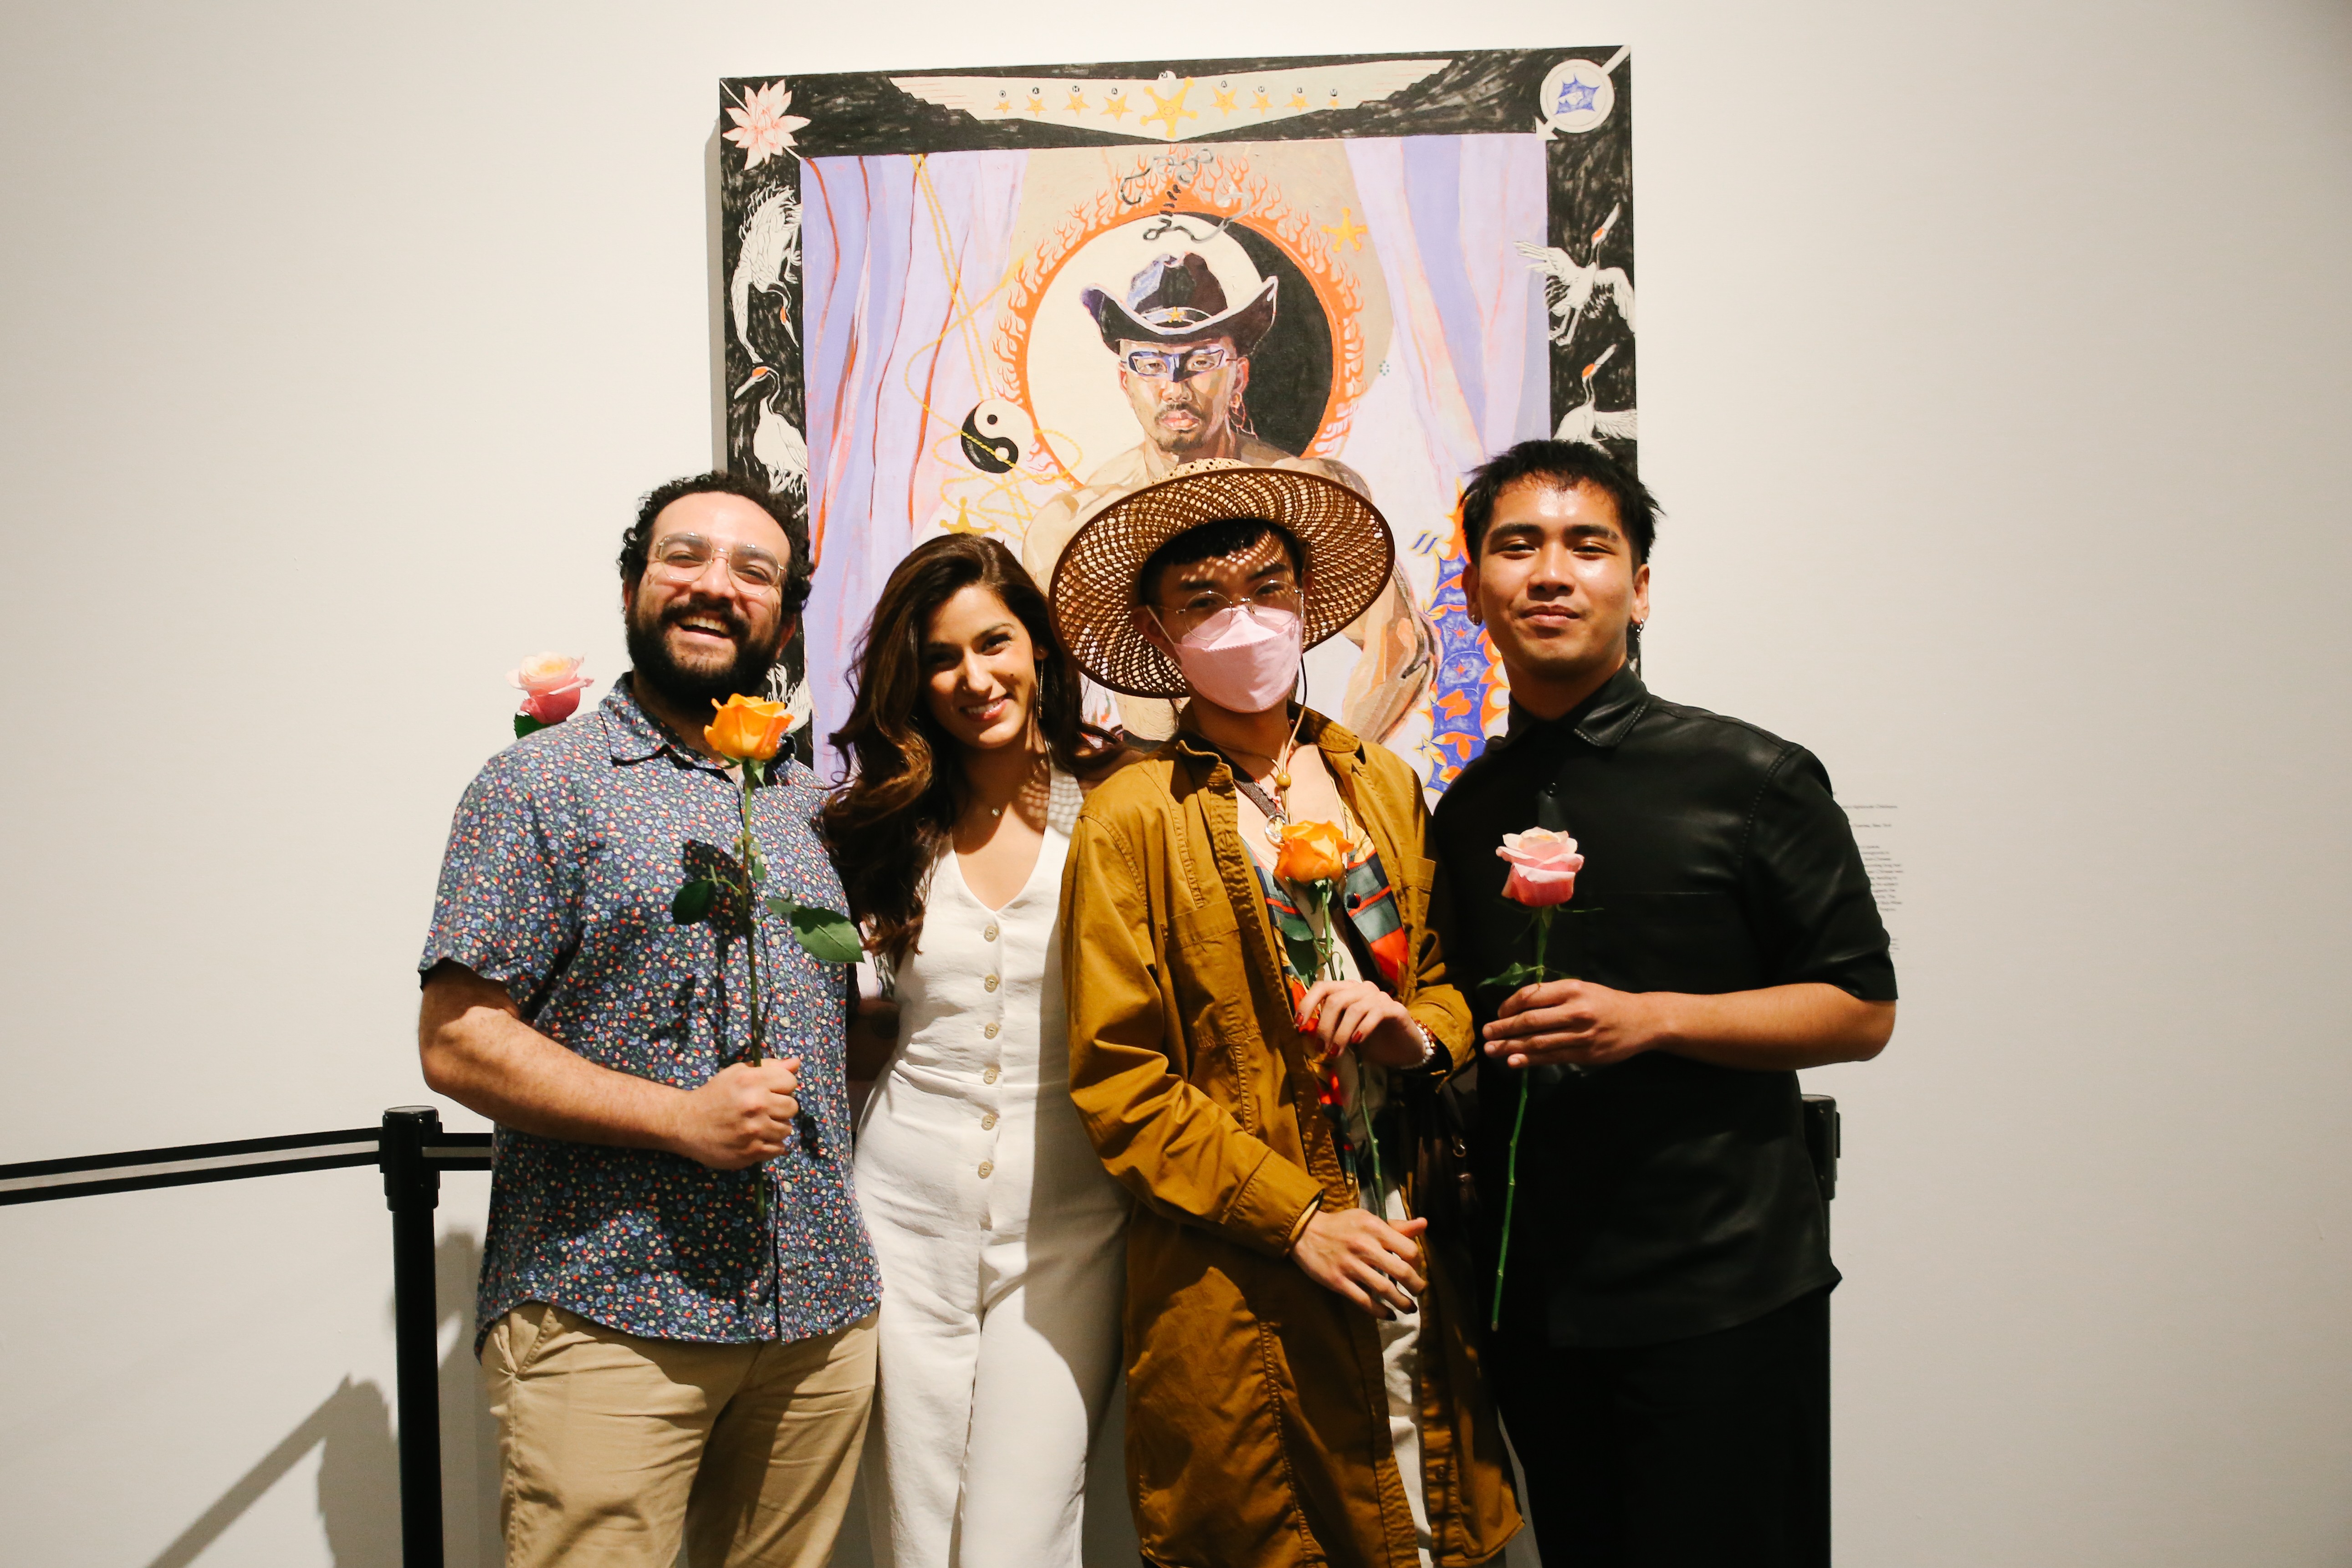 Hazem Fahmy, Kiran Bath, Wo Chan, and Elmo Tumbokon smile together in front of Oscar yi Hou’s artwork at the Brooklyn Museum after giving a reading at Brooklyn Museum’s First Saturdays.